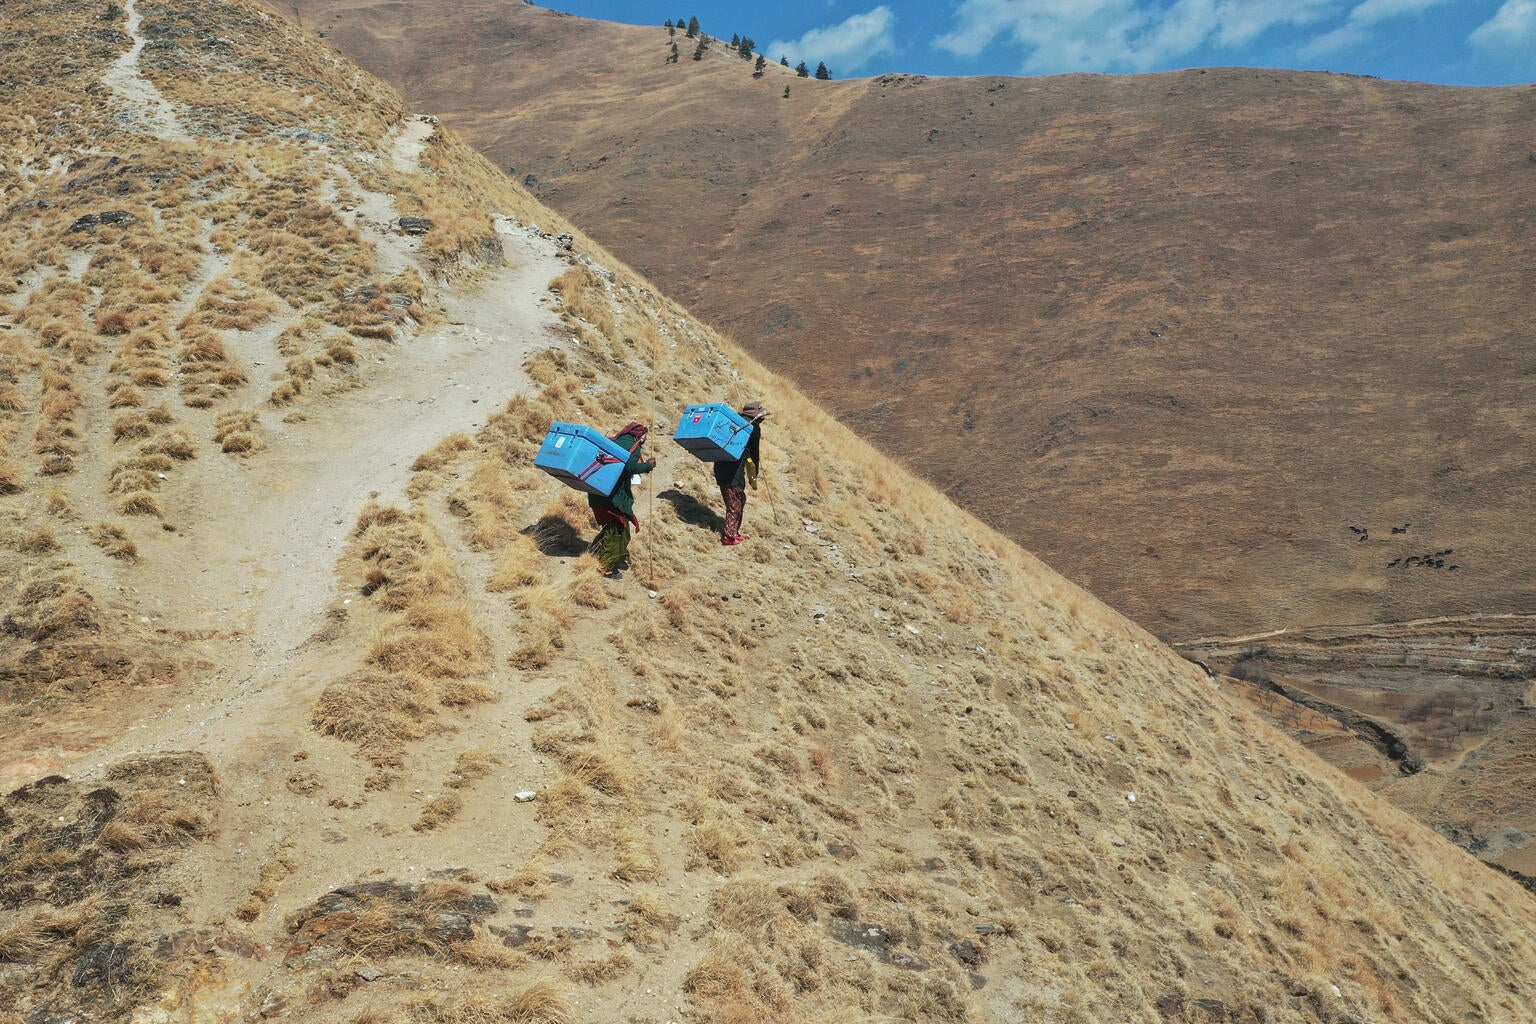 Two men are walking through a deserted mountain trail. They are carrying an cooler box on their bags with the UNICEF logo